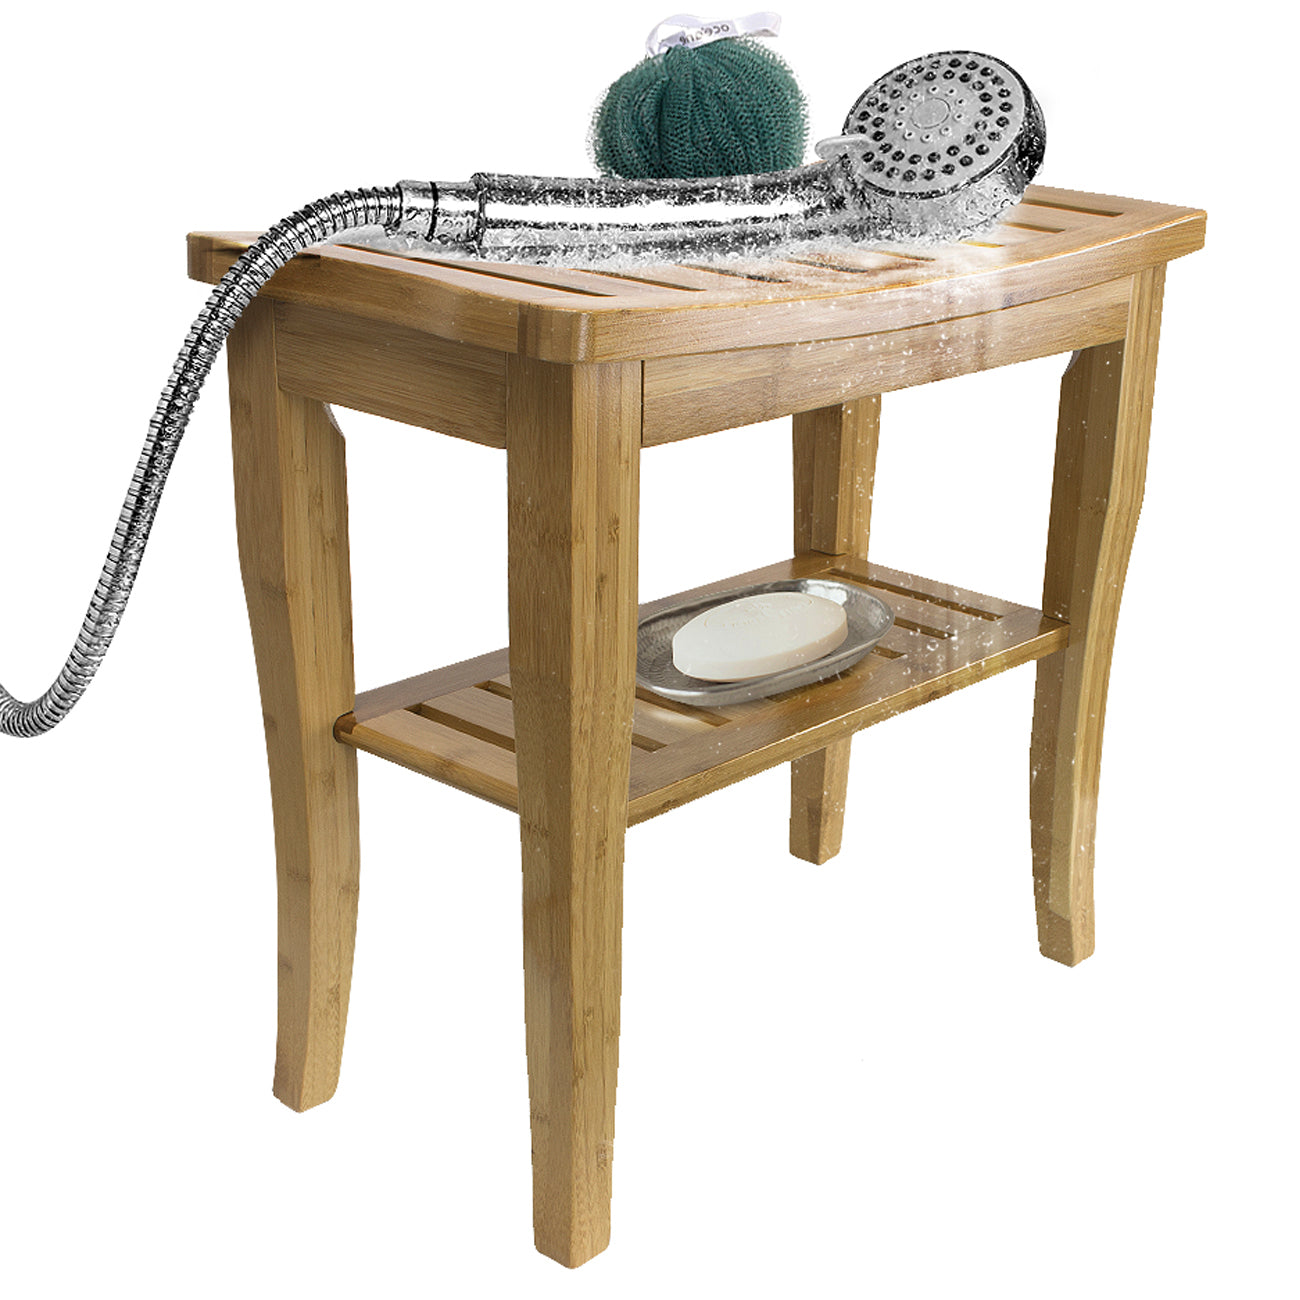 Bamboo Bench Stool with Shelf - Sorbus Home